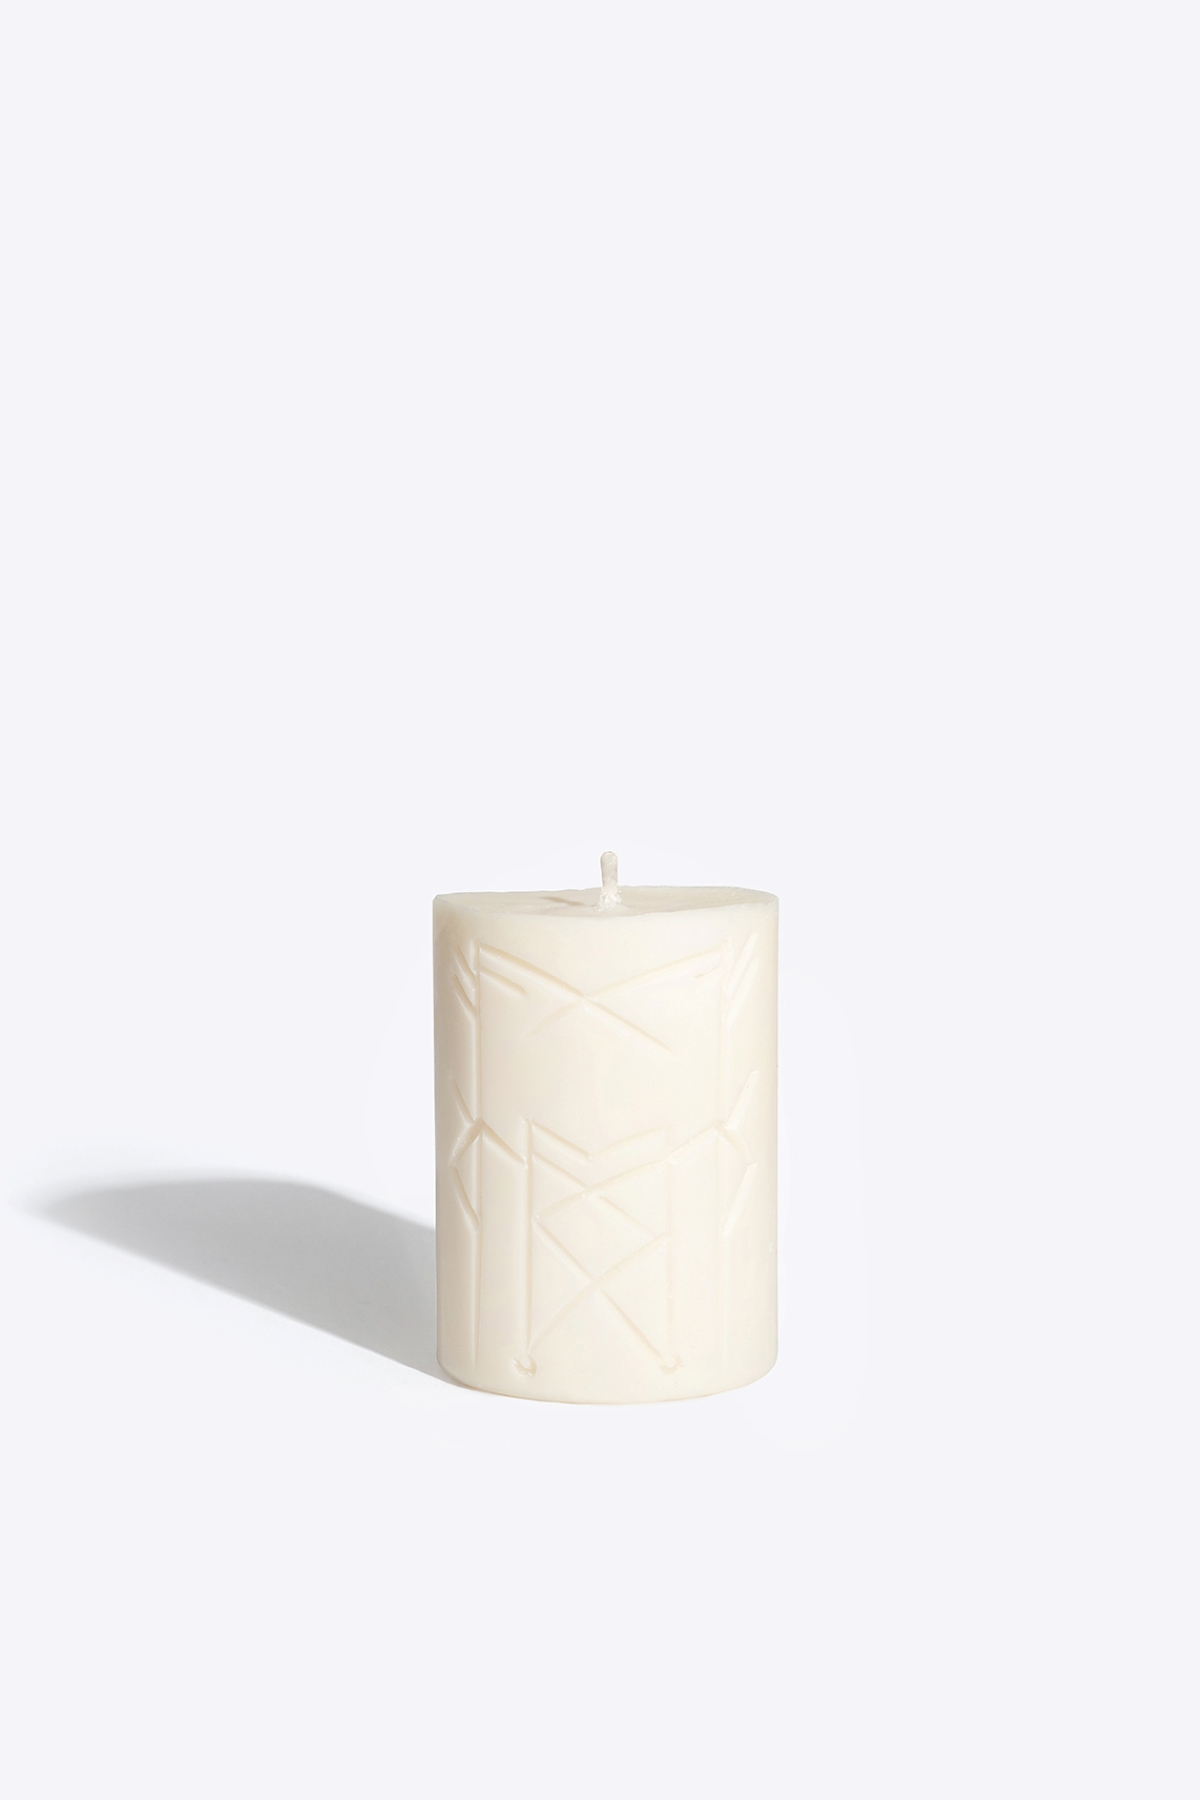 Rune candle NORNS